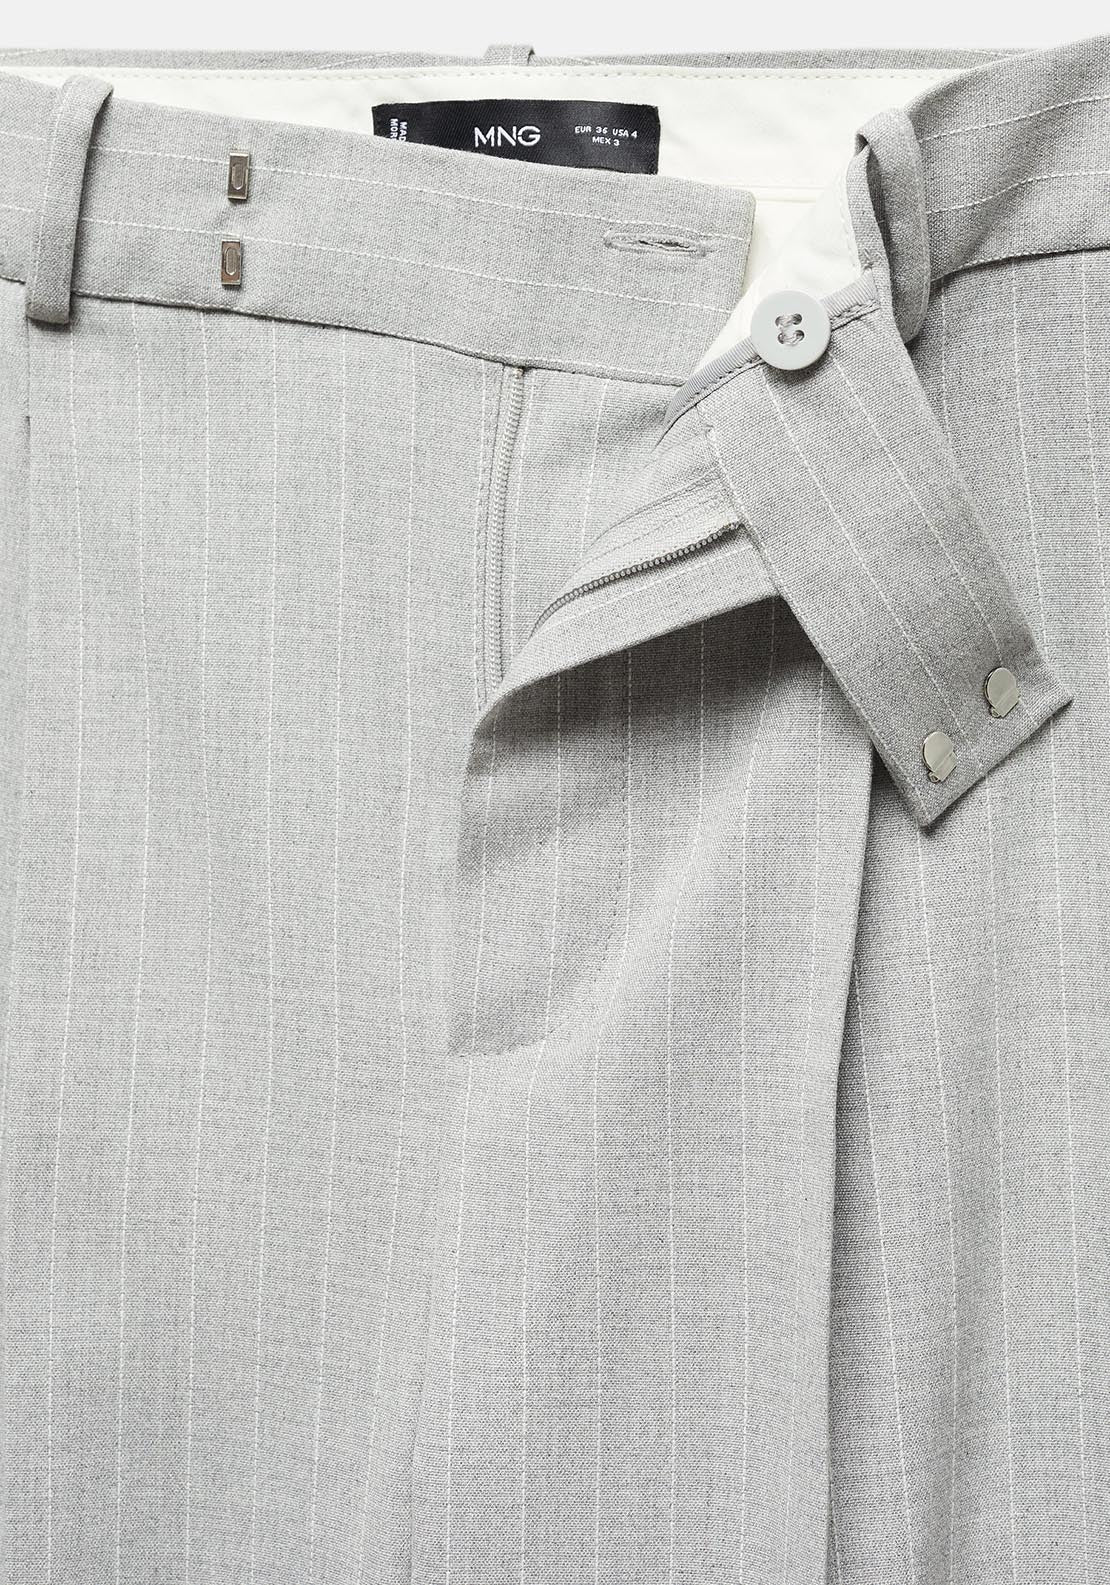 Mango Pinstripe suit trousers 3 Shaws Department Stores